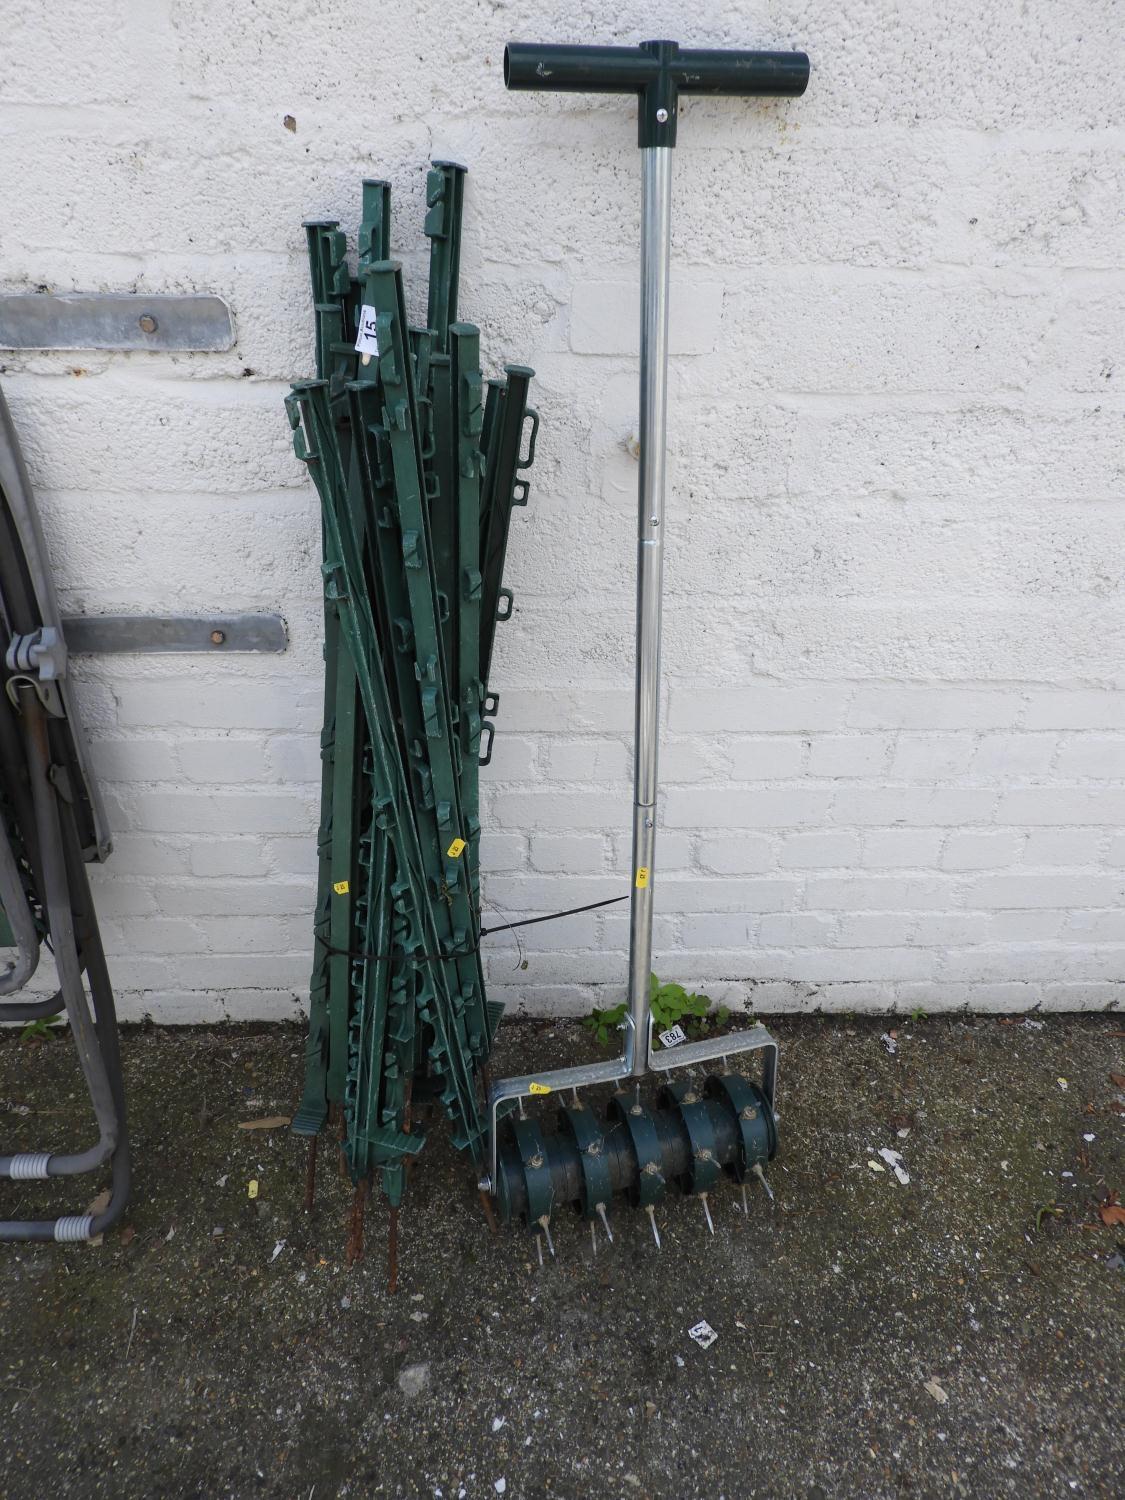 Quantity of Electric Fence Post Stakes and Lawn Aerator